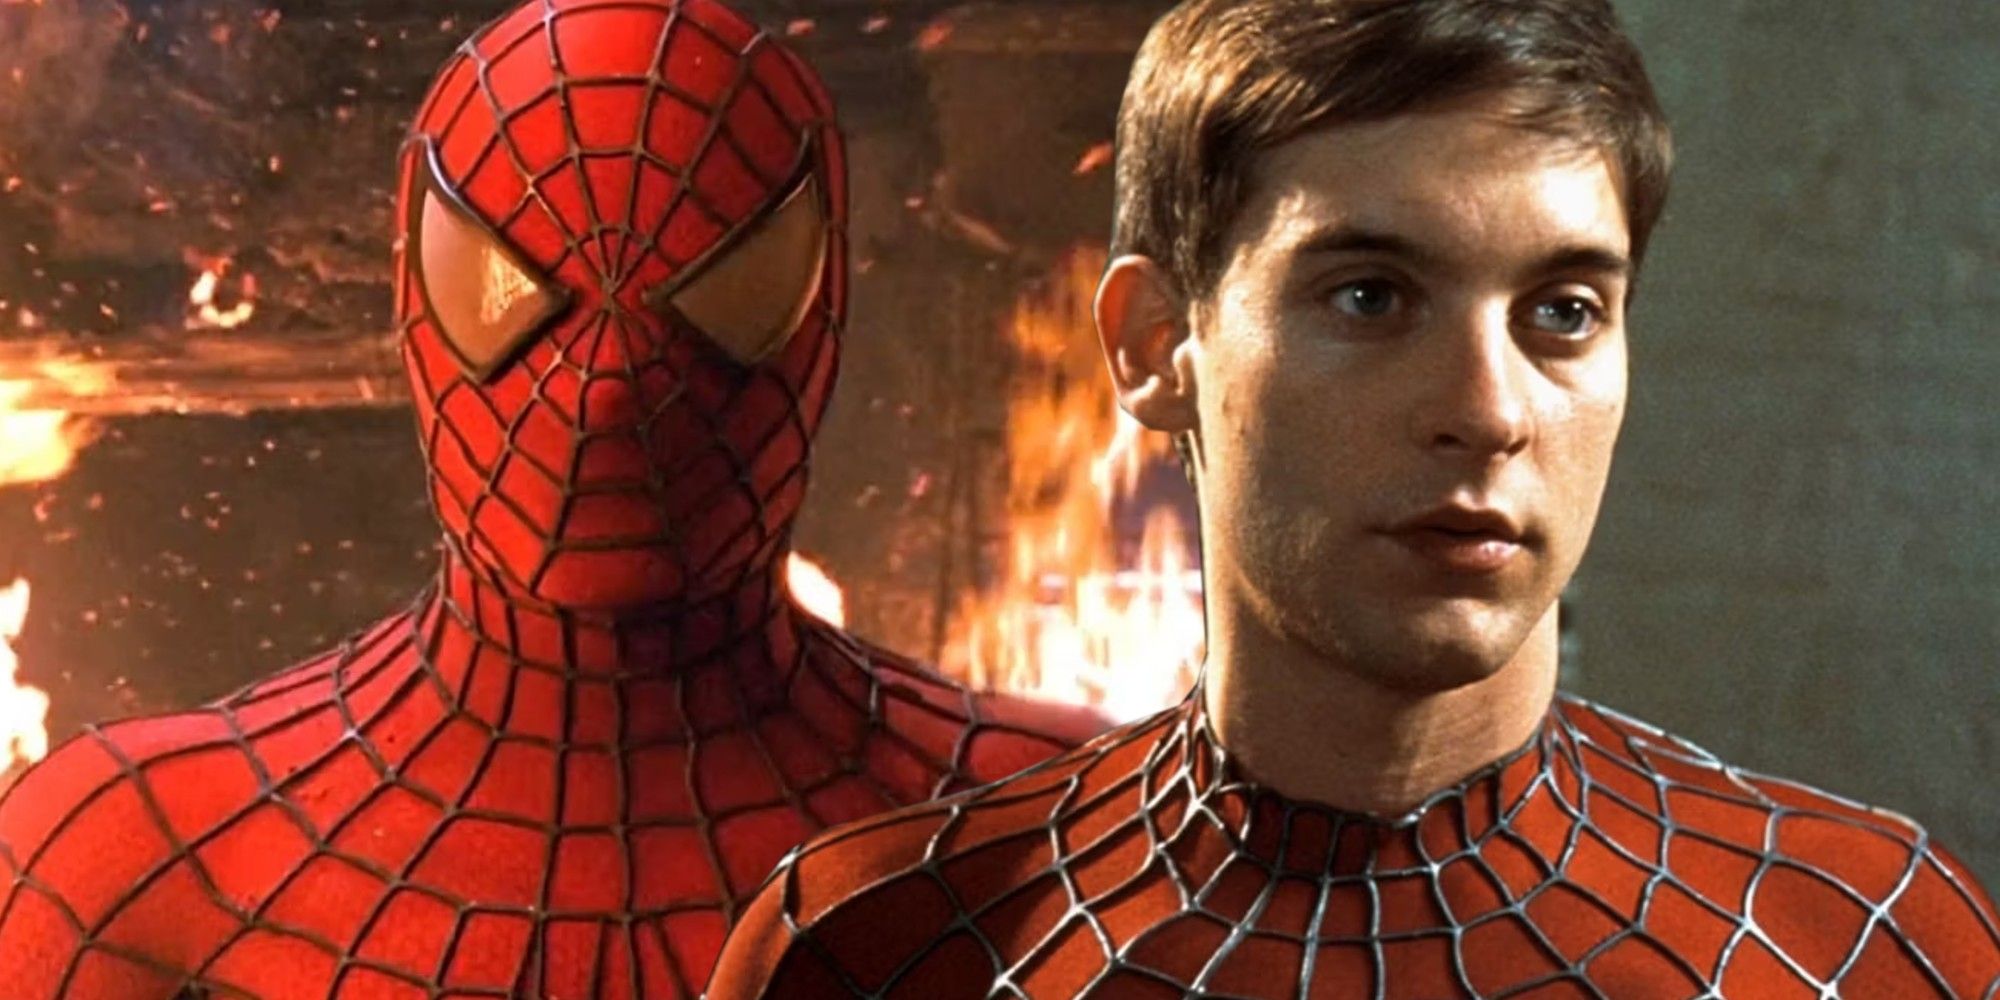 Peter Parker in his Spider-Man suit with and without the mask in Spider-Man 2